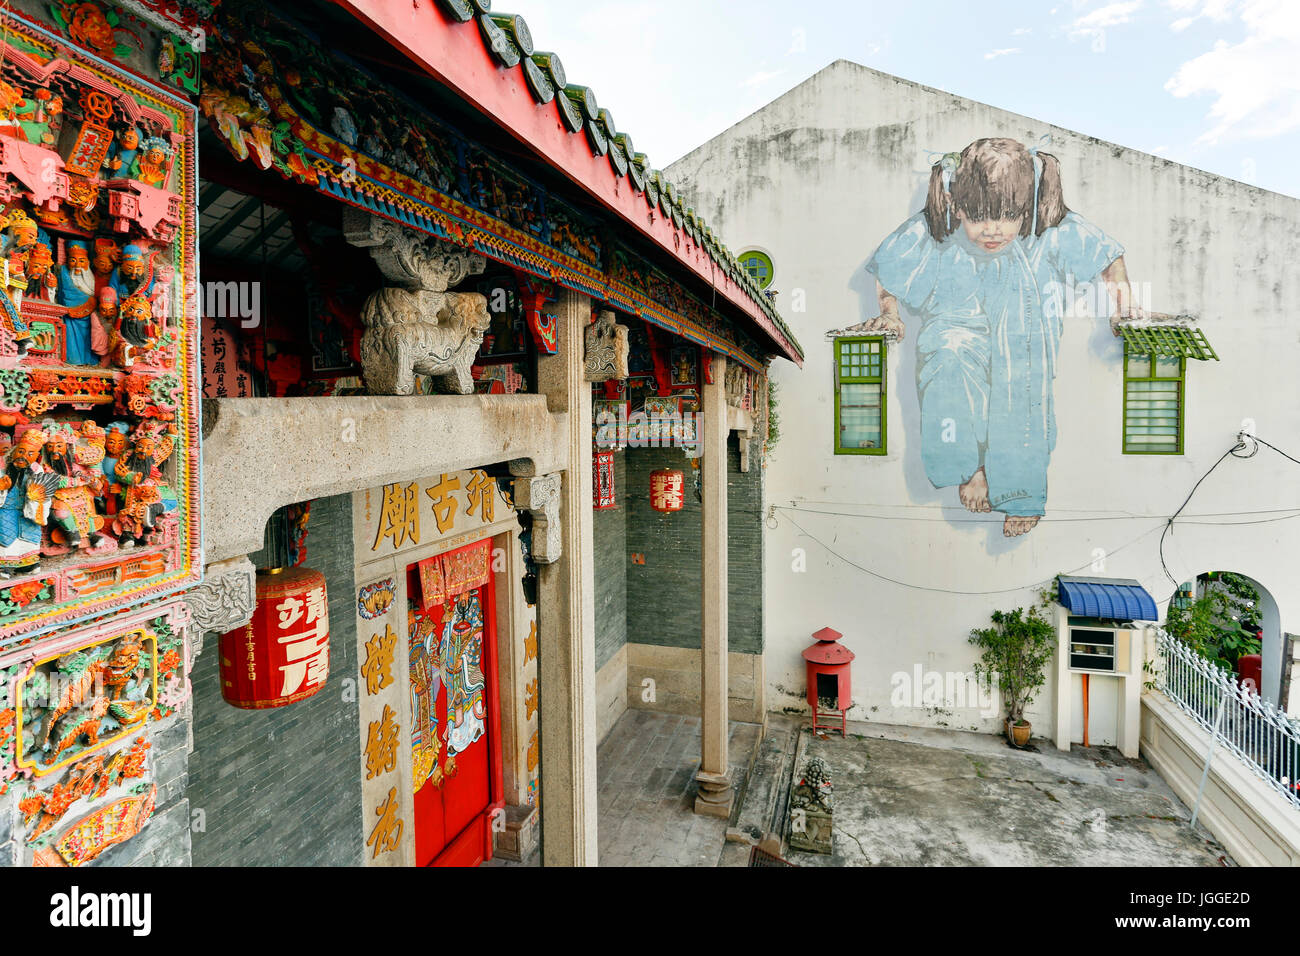 Kung Fu girl mural by artist Ernest Zacharevic. Street art located in Georgetown, Penang Island, Malaysia. Stock Photo